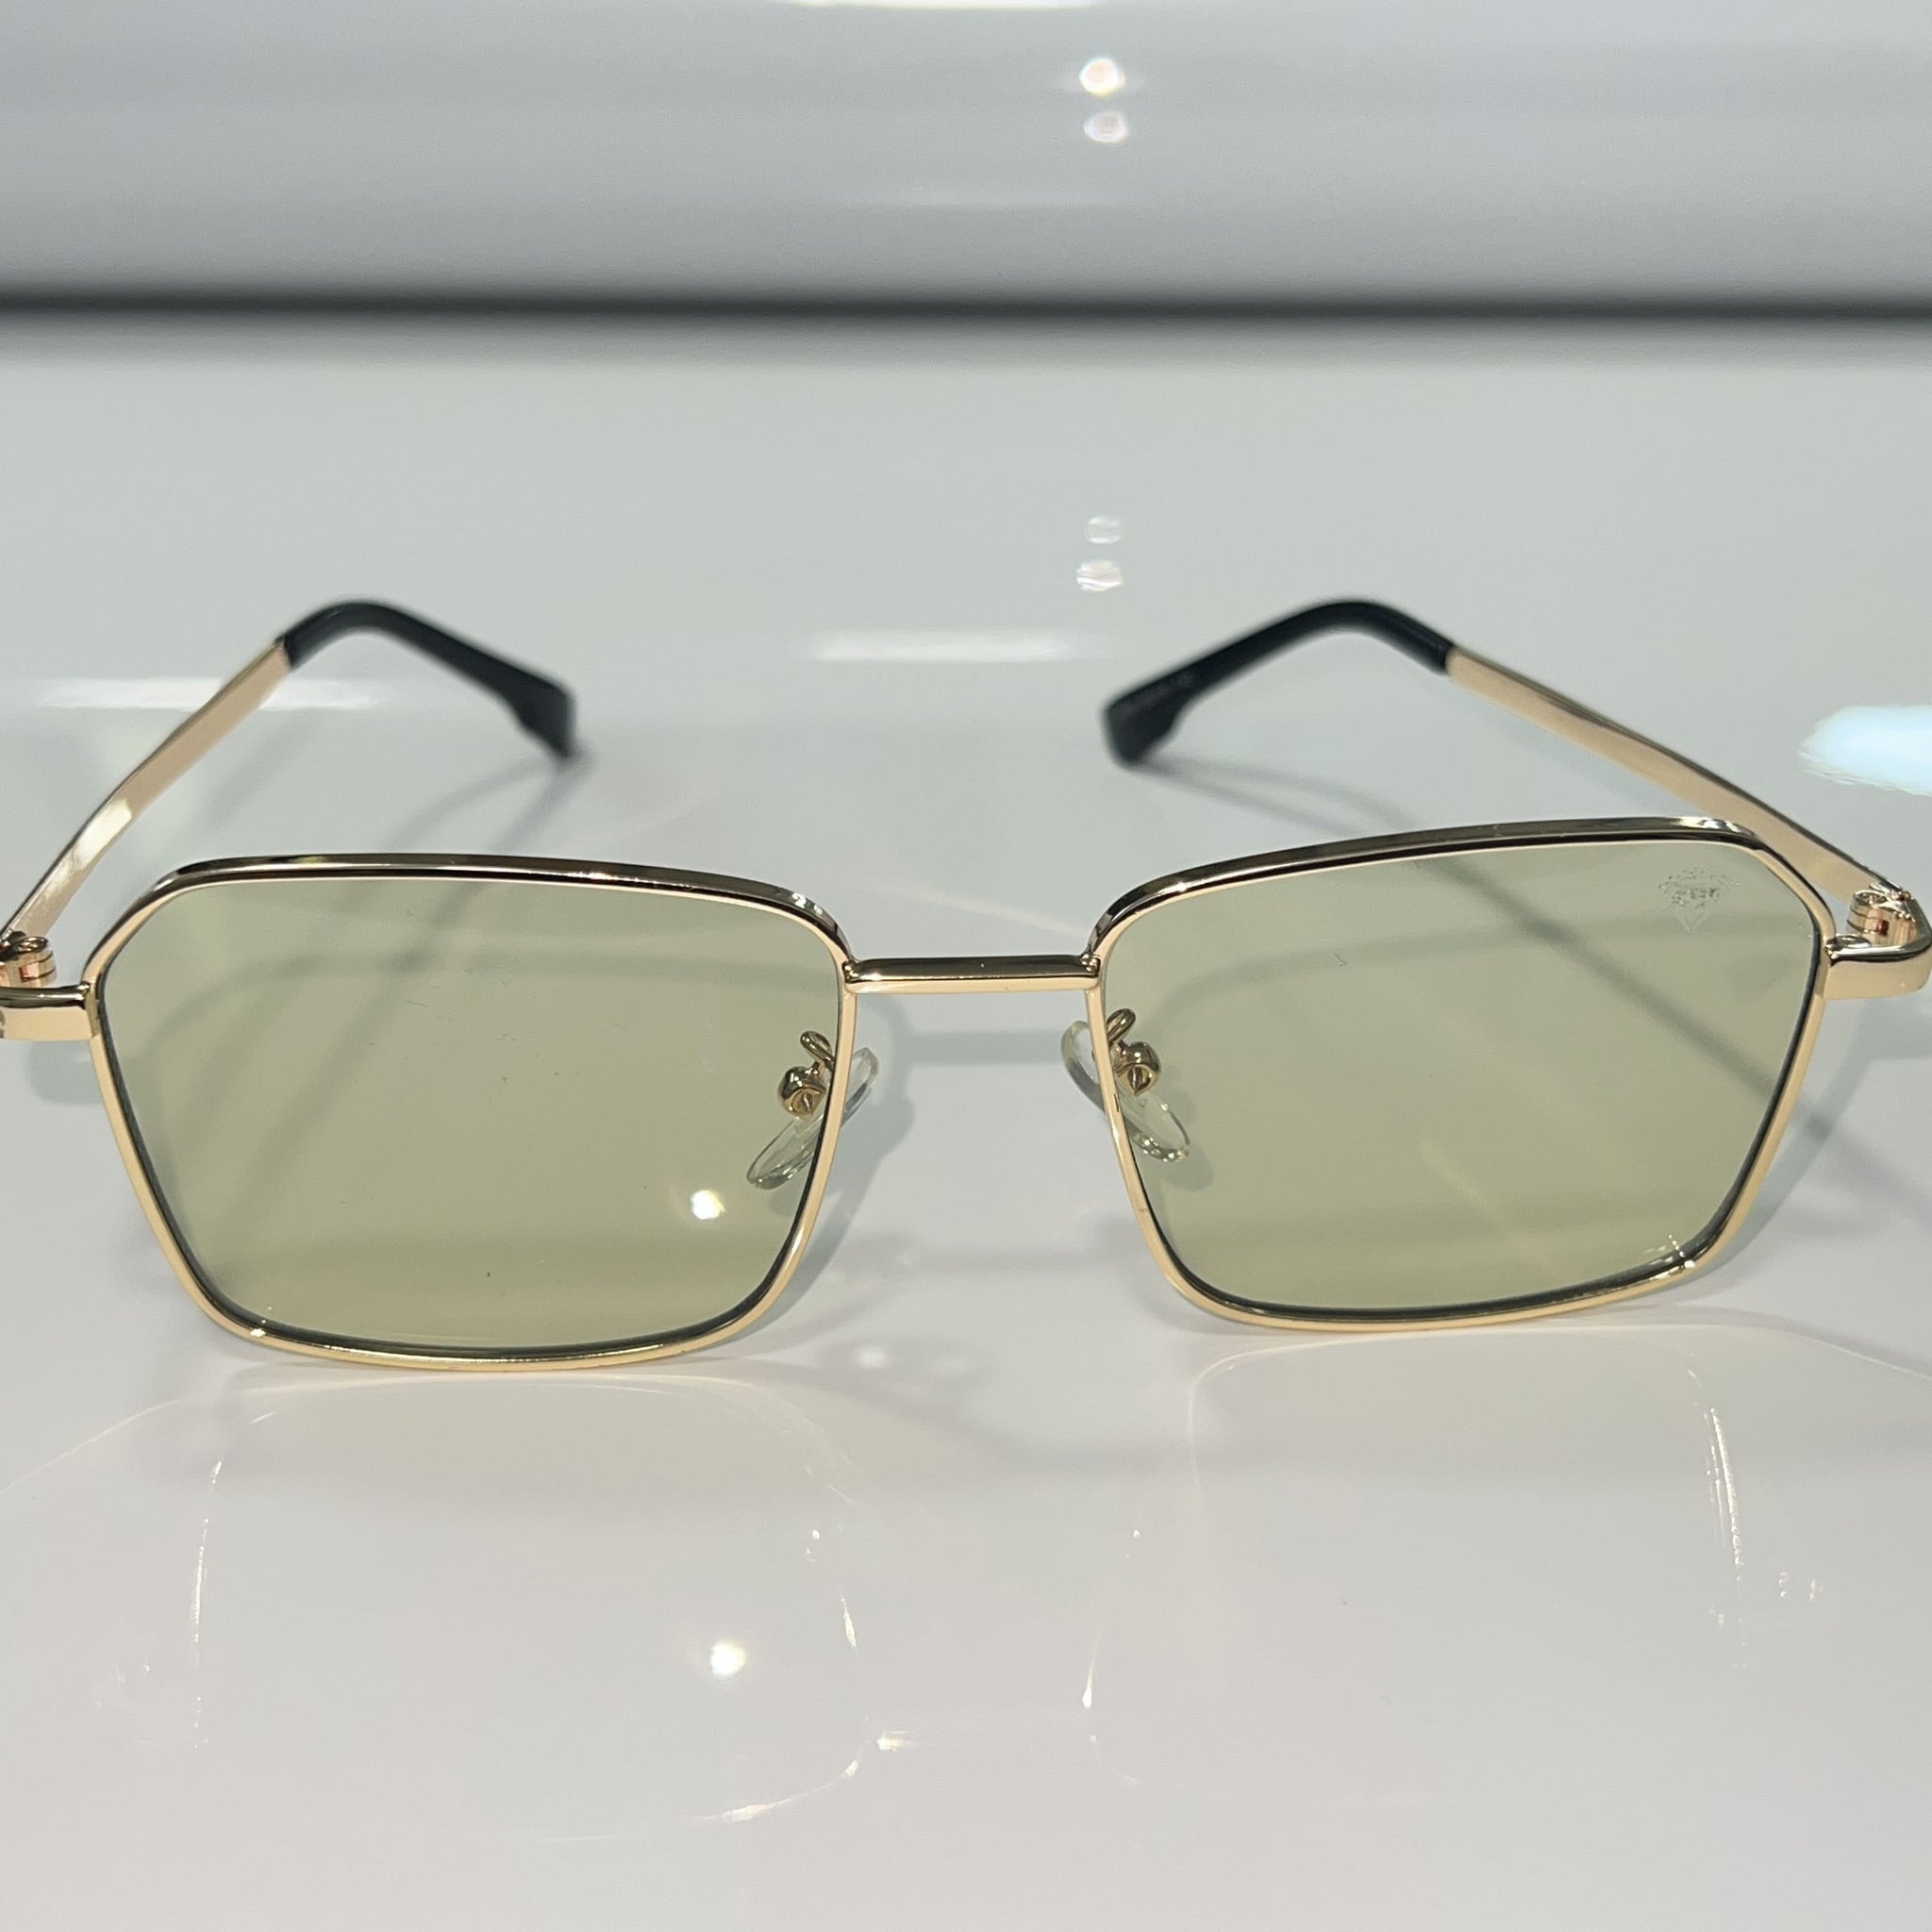 Celebrity Glasses - 14k gold plated - Sehgal Glasses - Green Shade